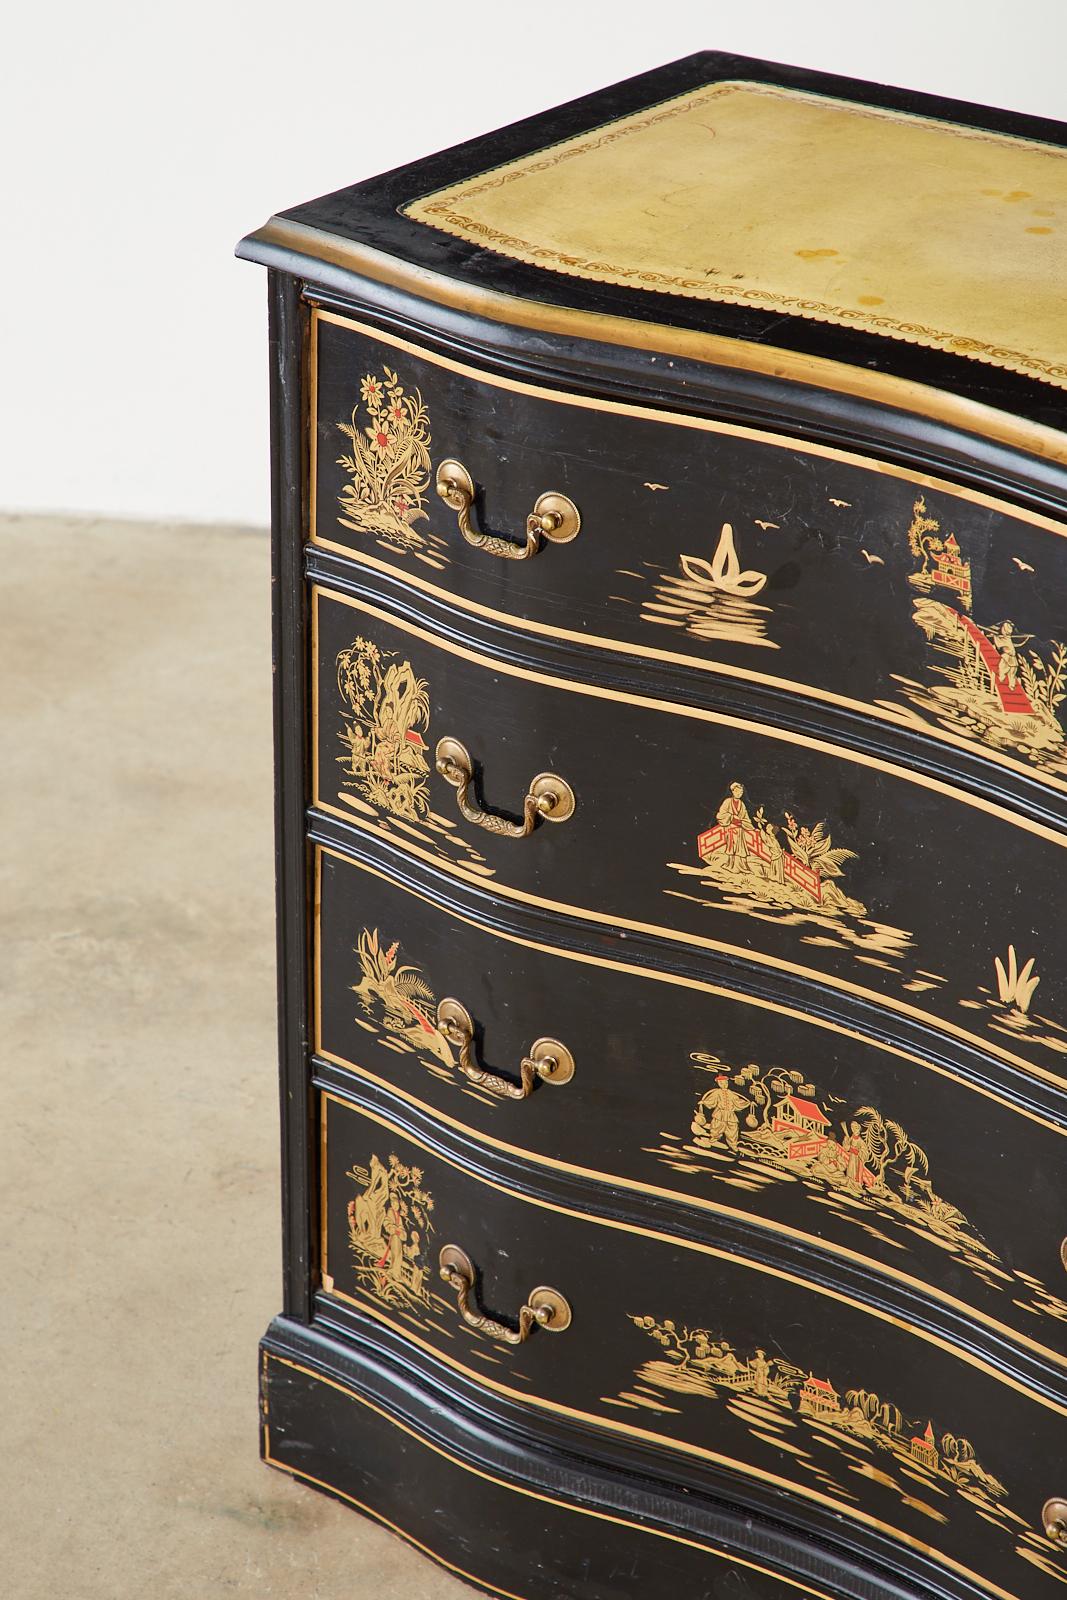 Lacquered English Regency Style Chinoiserie Decorated Commode or Chest